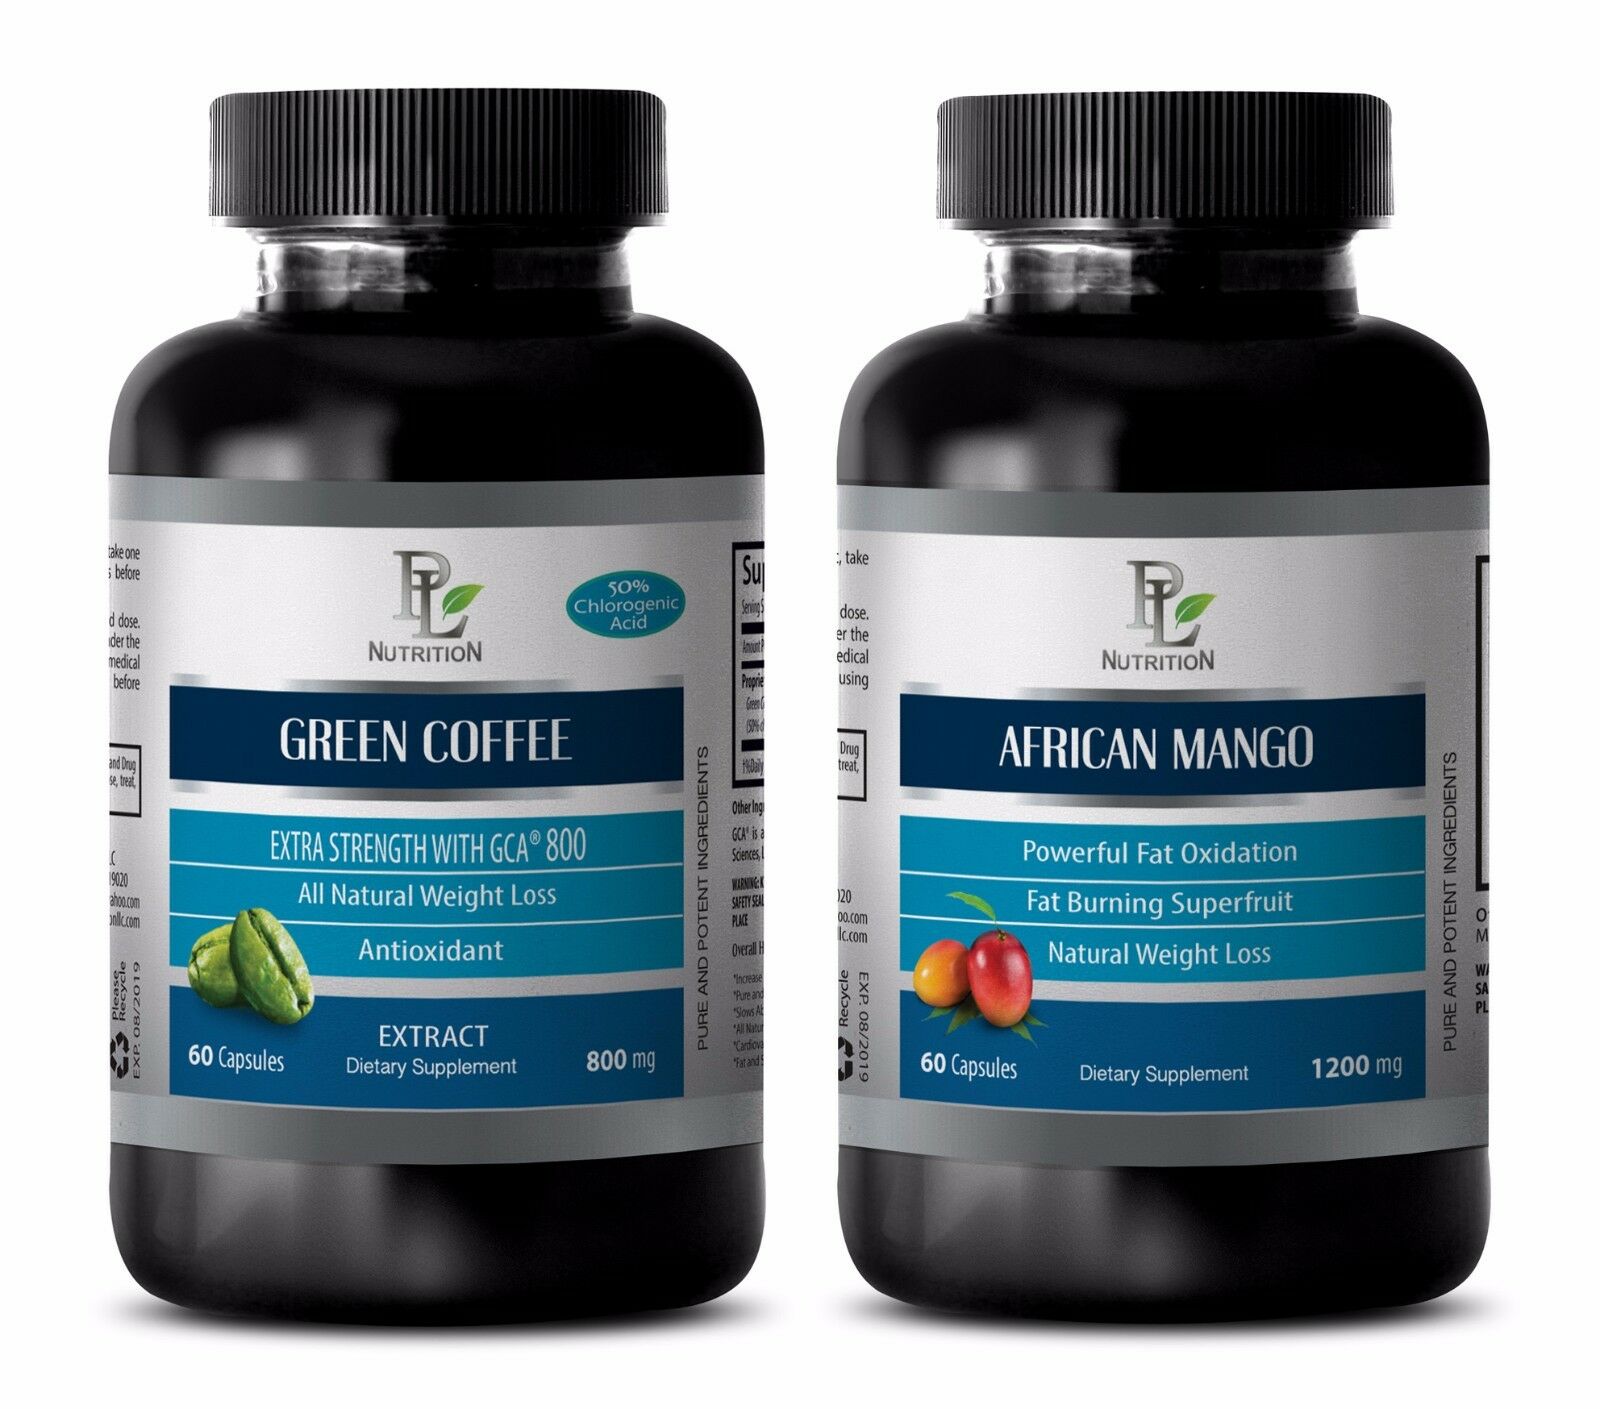 Weight Loss Pills For Men - Green Coffee Extract – African Mango Combo - African